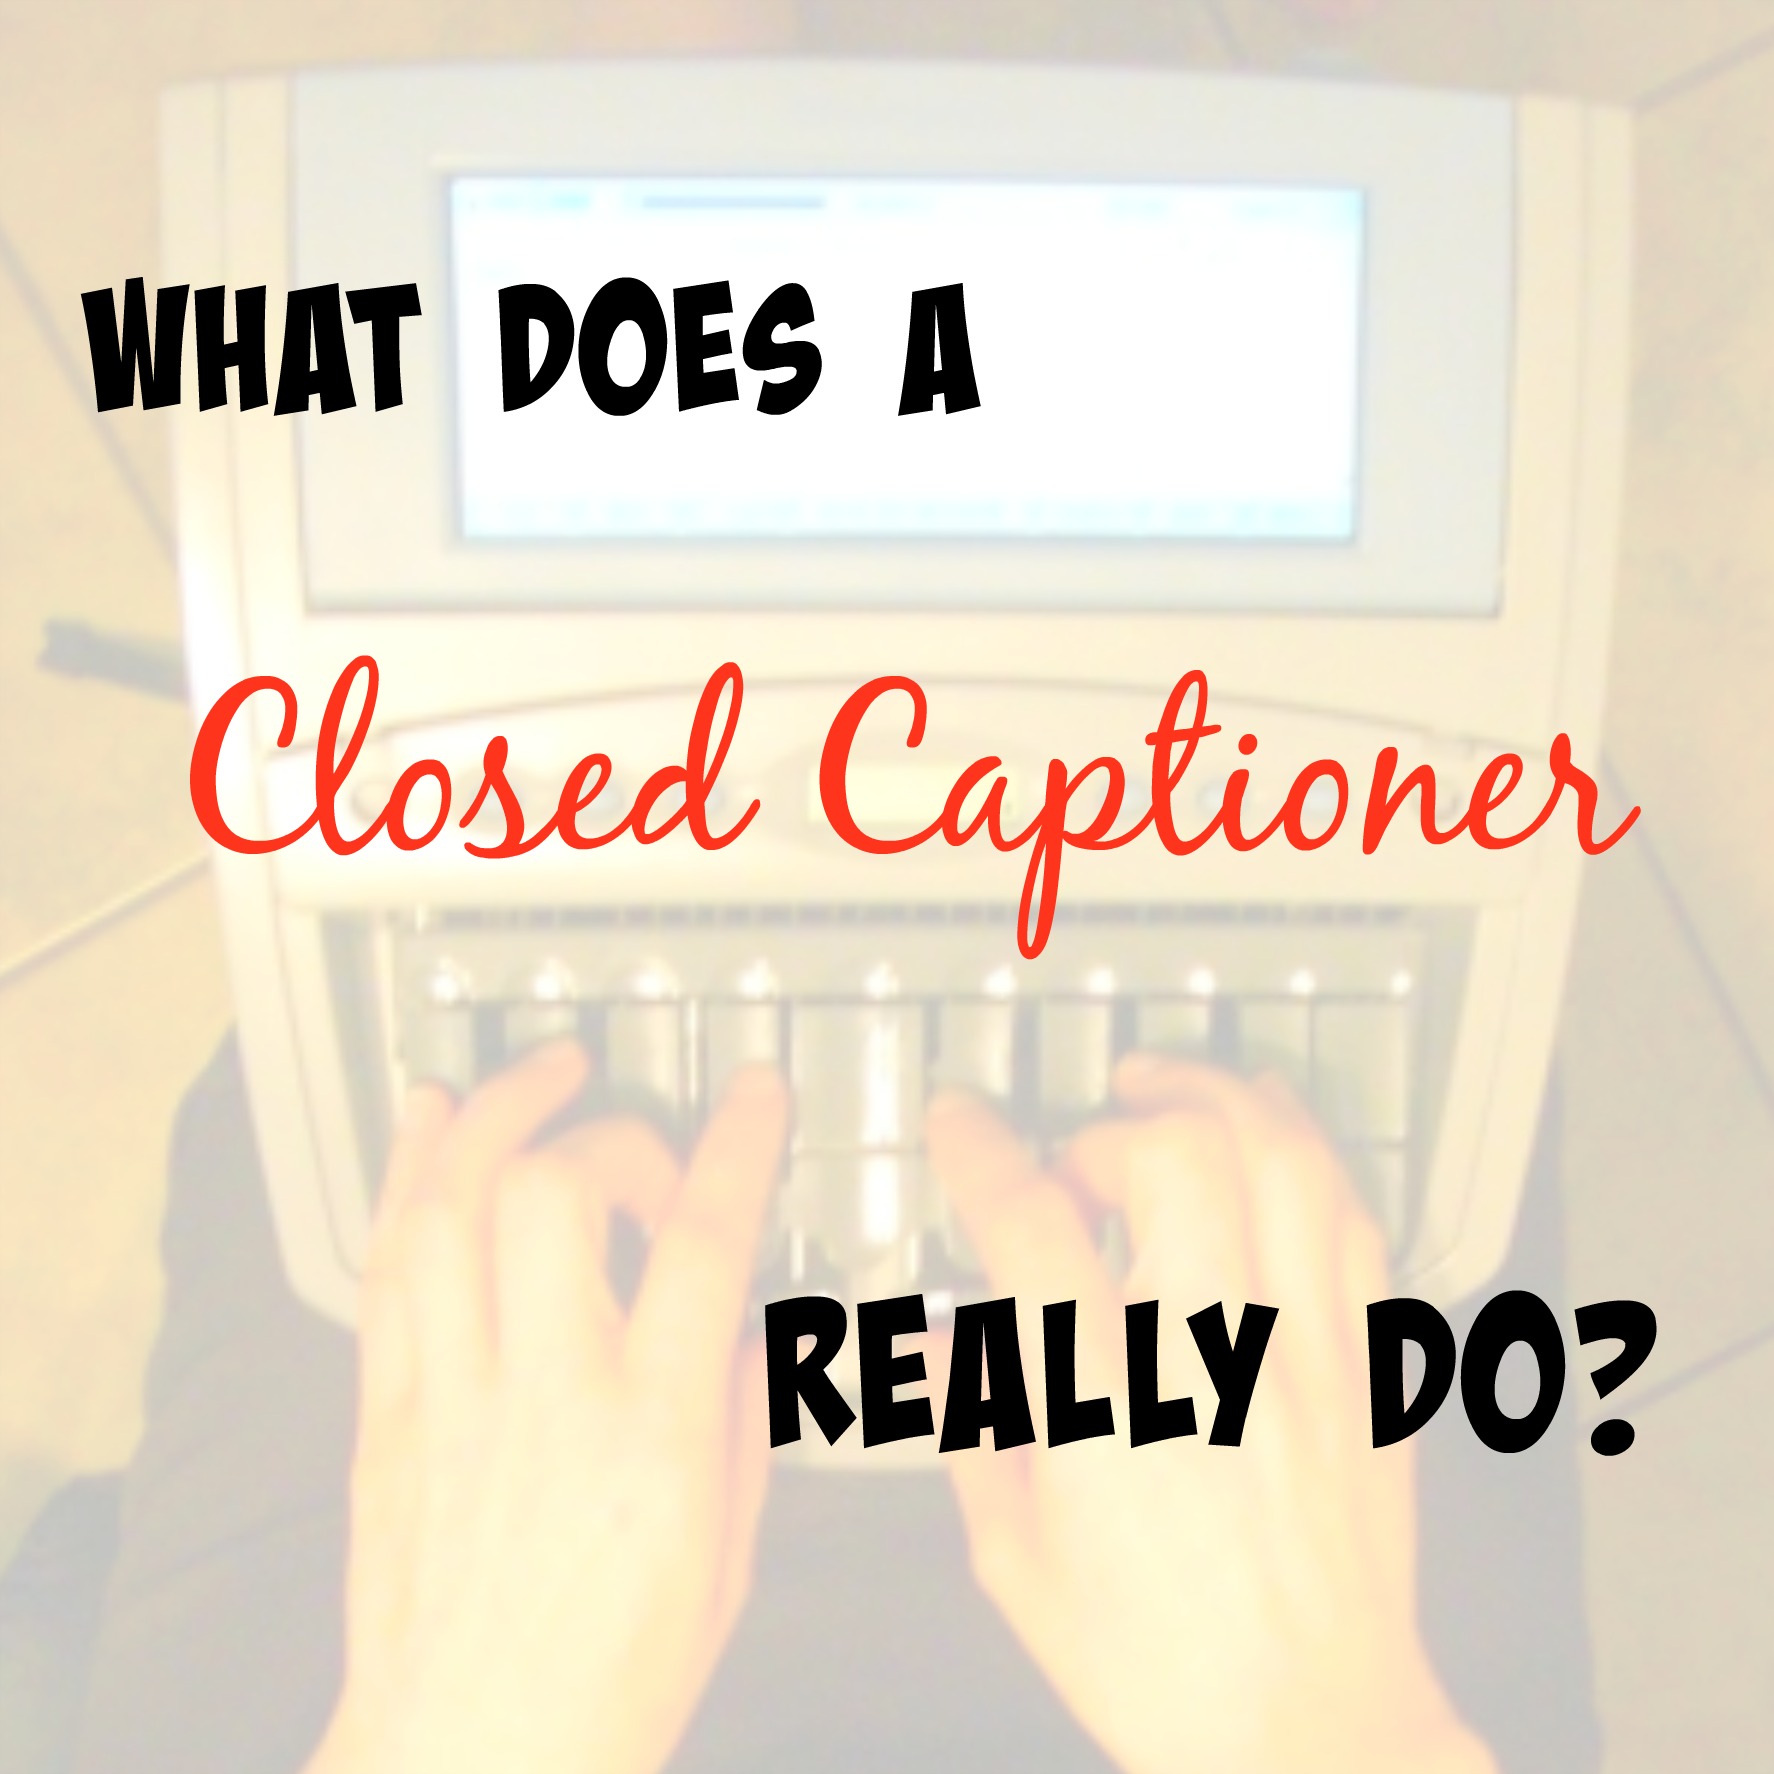 What is a closed captioner